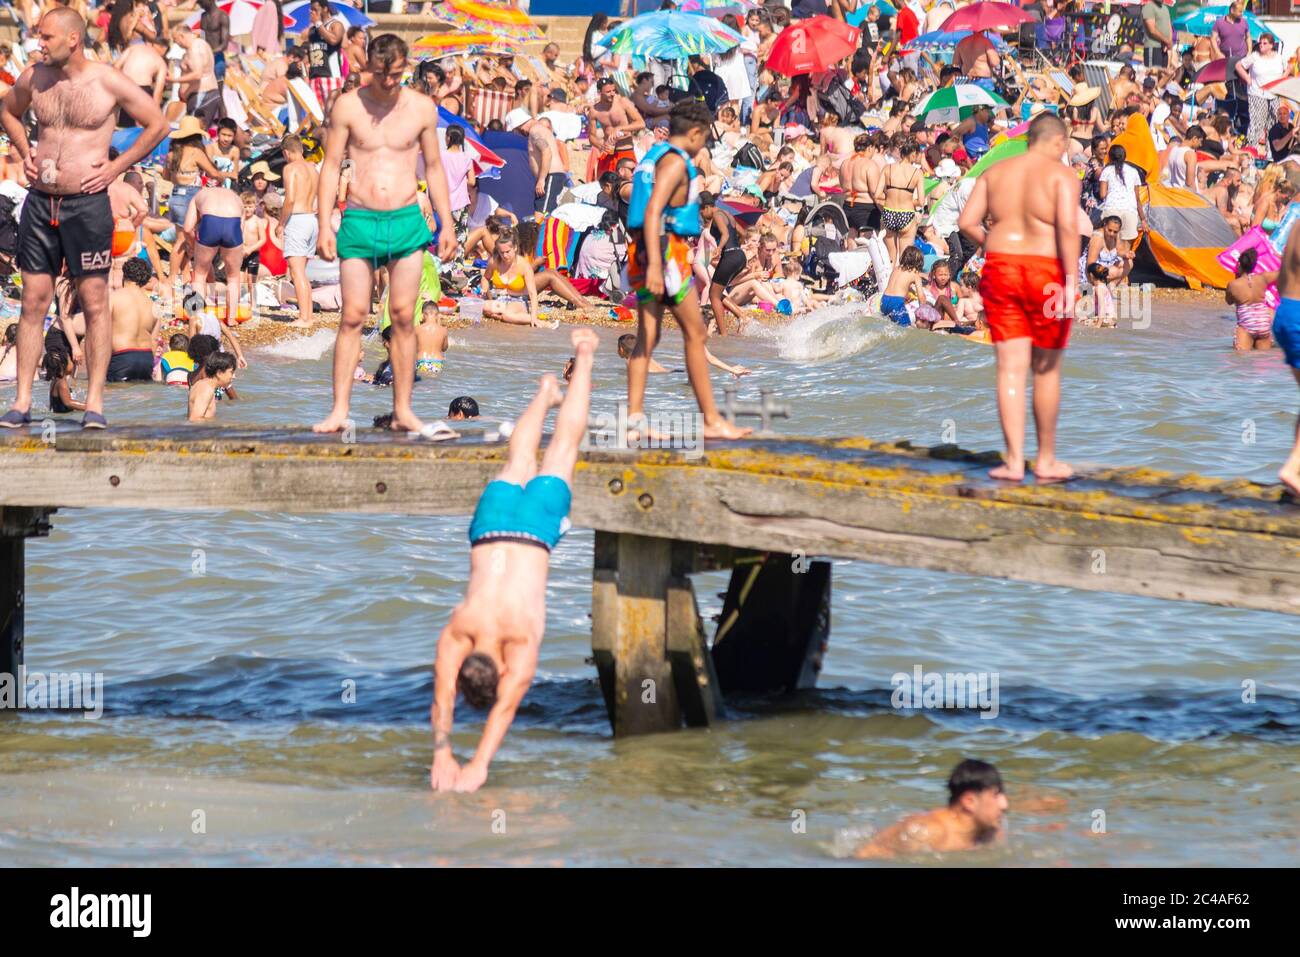 Southend on Sea, Essex, UK. 25th Jun, 2020. With the forecast record temperatures for 2020 people are heading to the seafront to cool down, despite the COVID-19 Coronavirus advice. In Southend on Sea the shore of the Thames Estuary is packed, with people swimming and jumping into the sea. White Caucasian male diving into the sea from a wooden pier with packed beach beyond Stock Photo